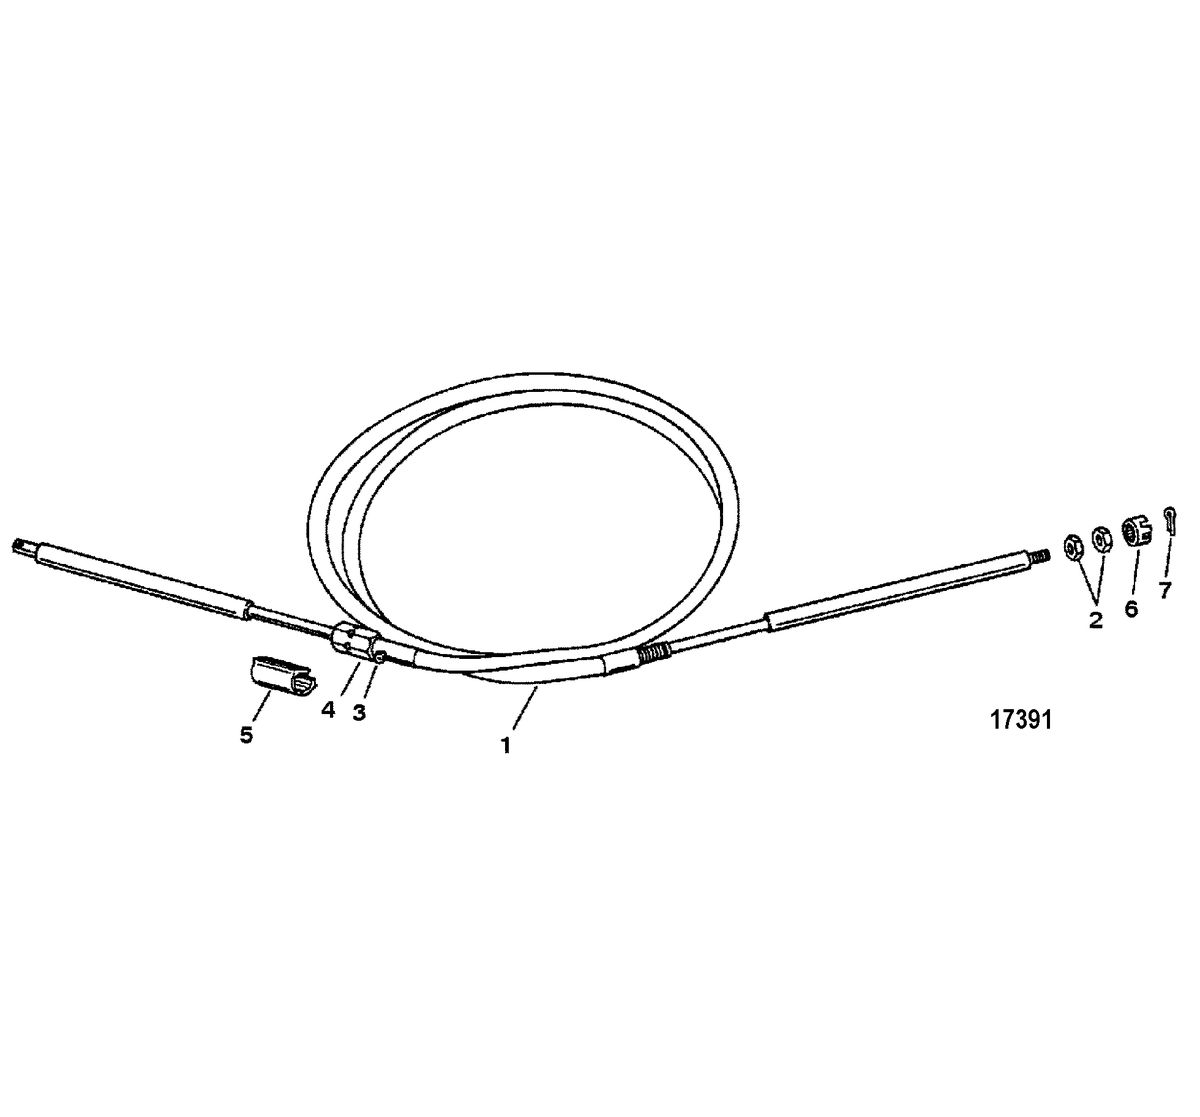 ACCESSORIES STEERING SYSTEMS AND COMPONENTS Steering Cable Assembly(11111A)